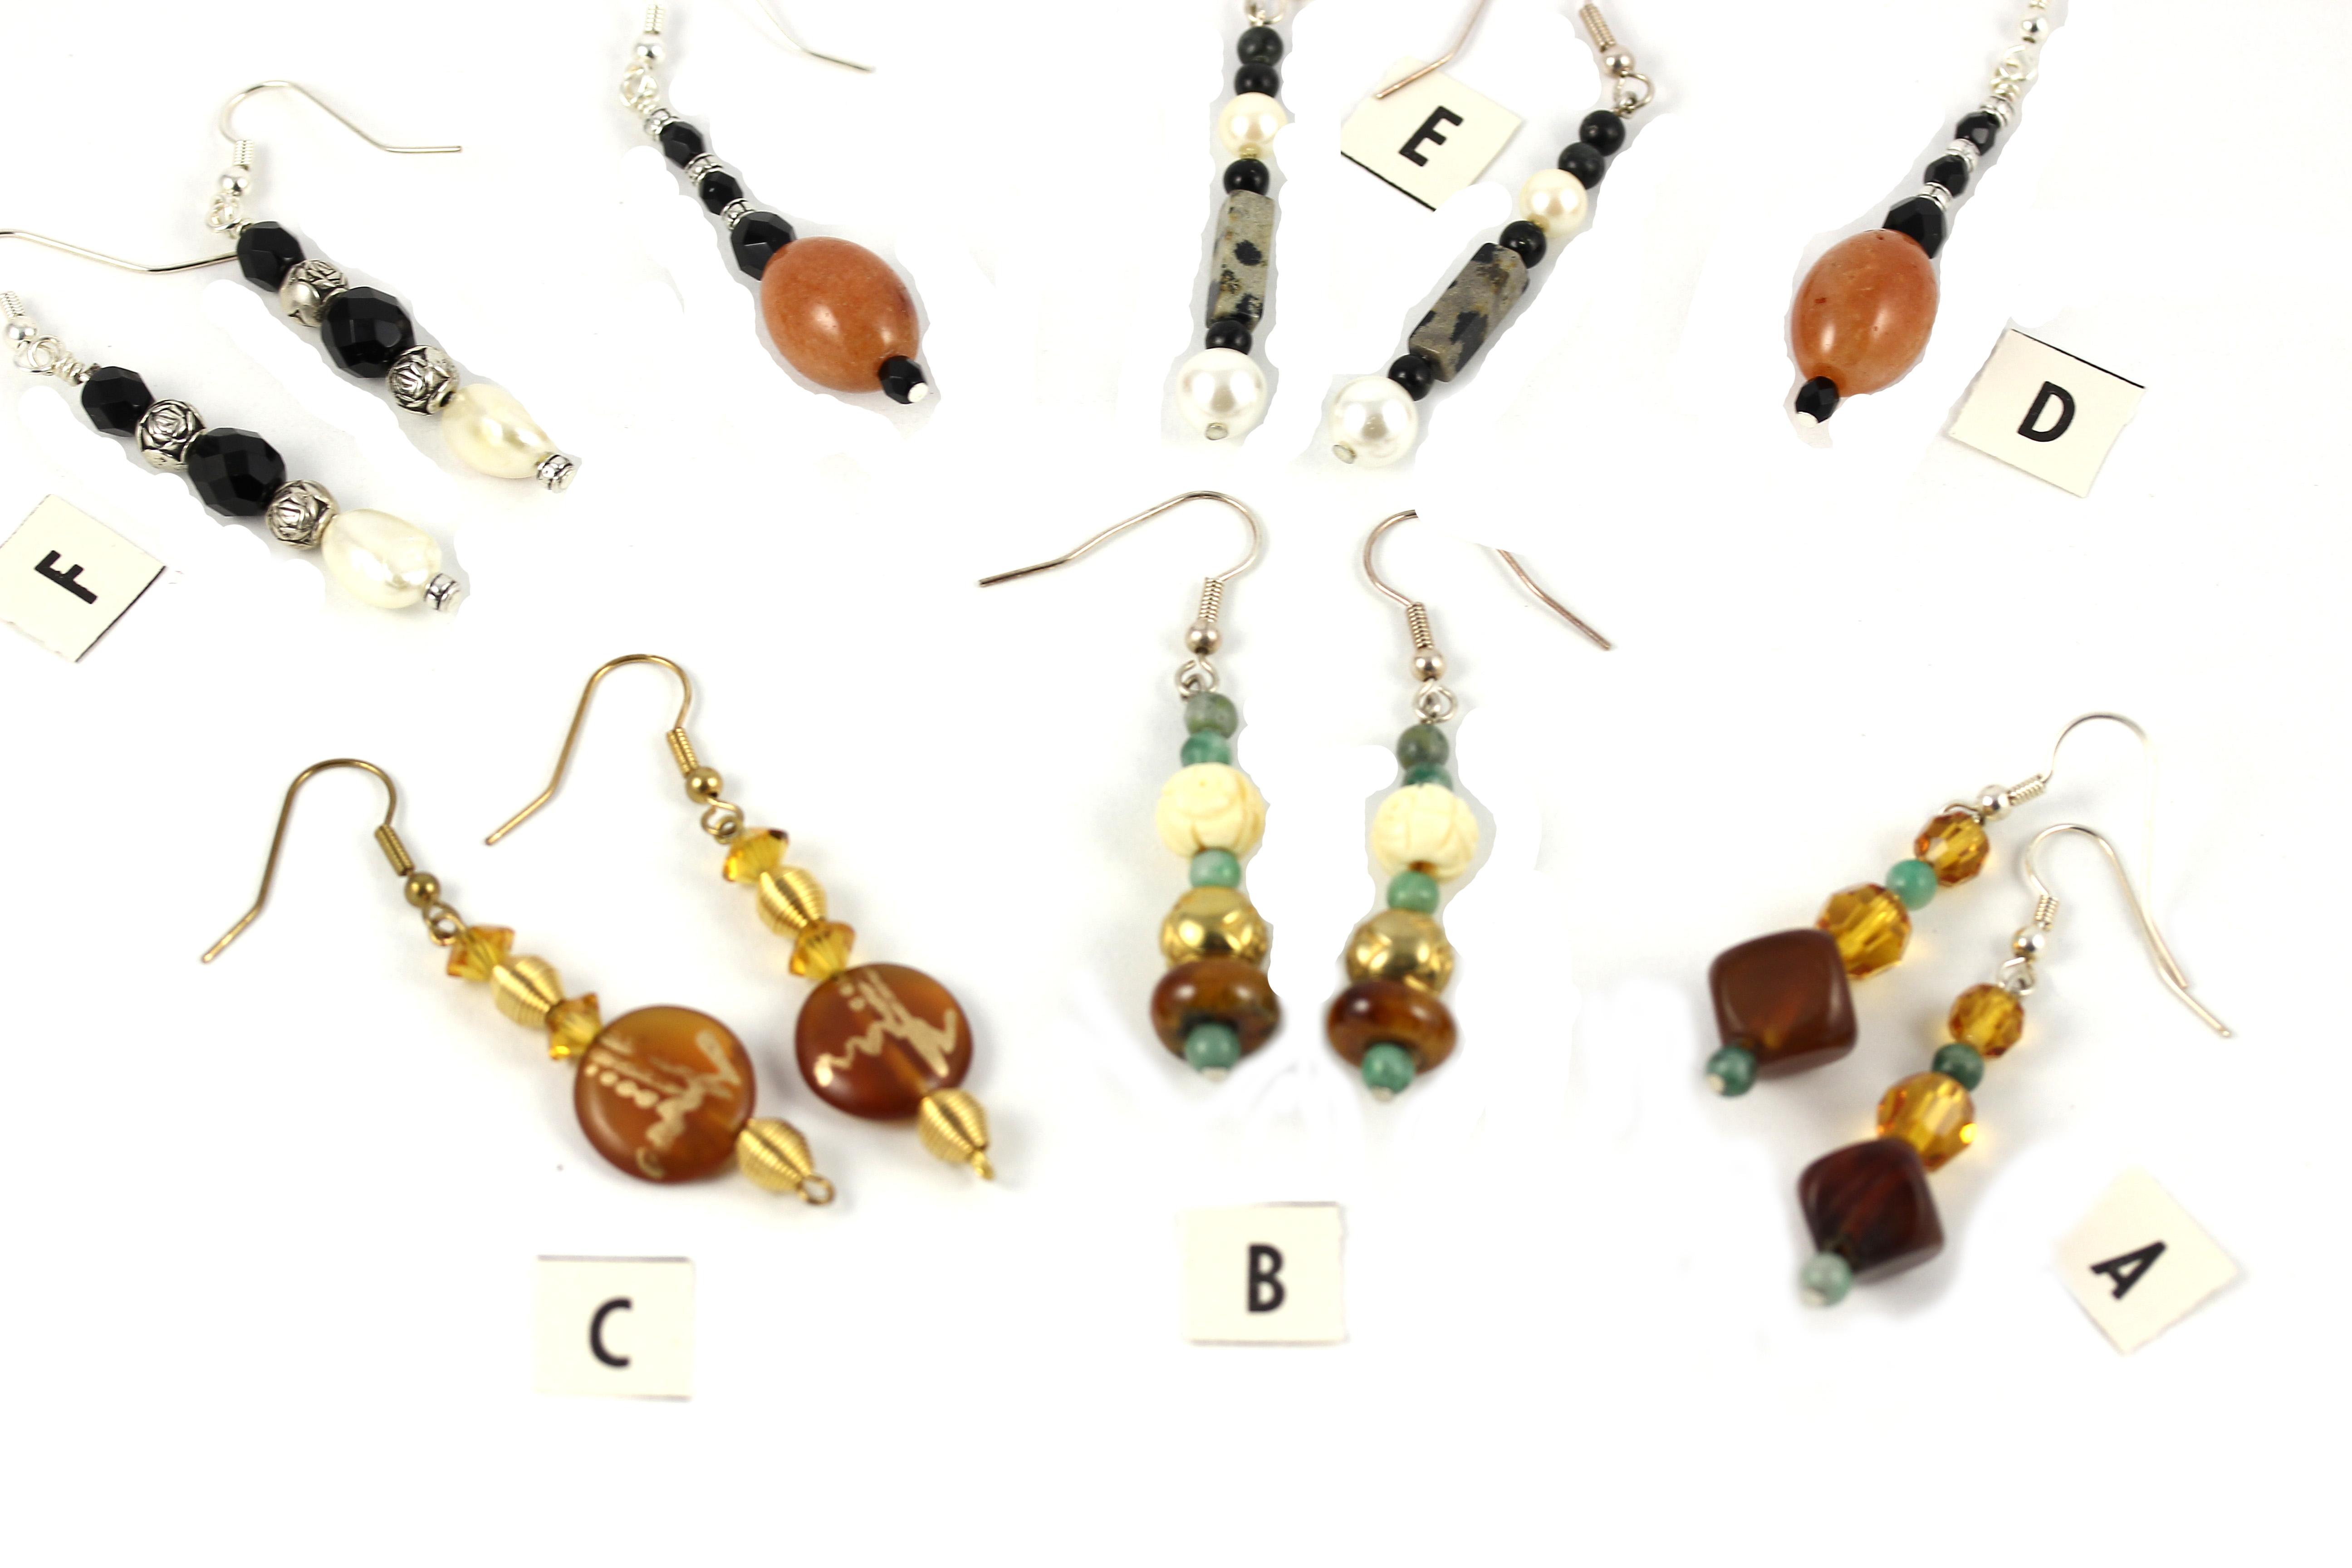 One of a Kind Pairs of Earrings with Semi-precious Stones. (Each pair sold separately)